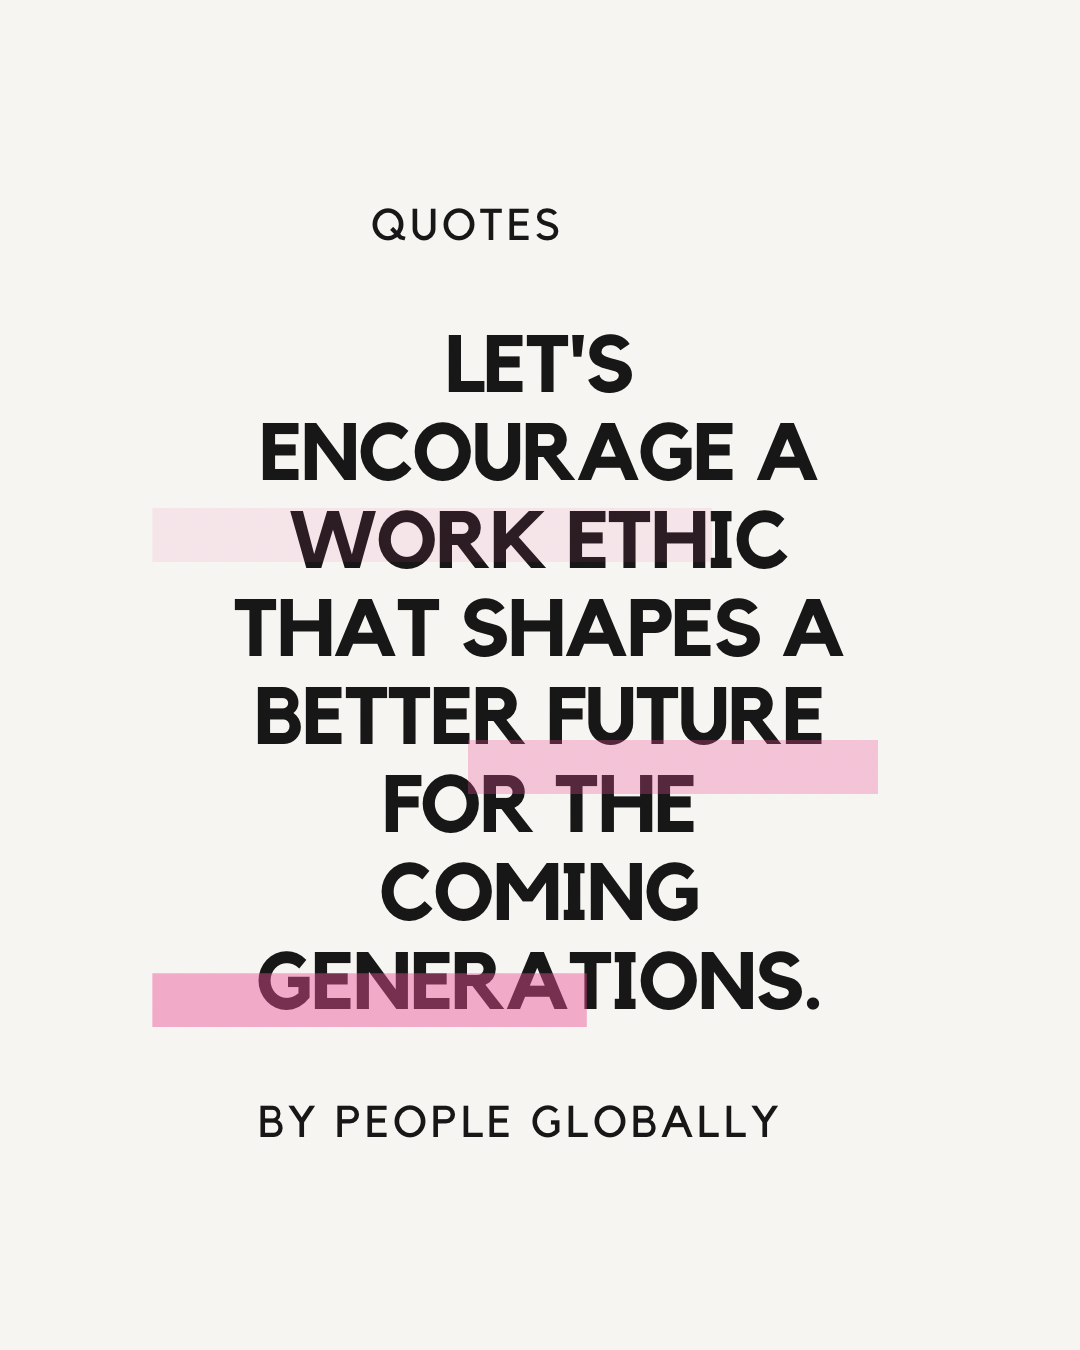 Let’s encourage a work ethic that shapes a better future for the coming generations.